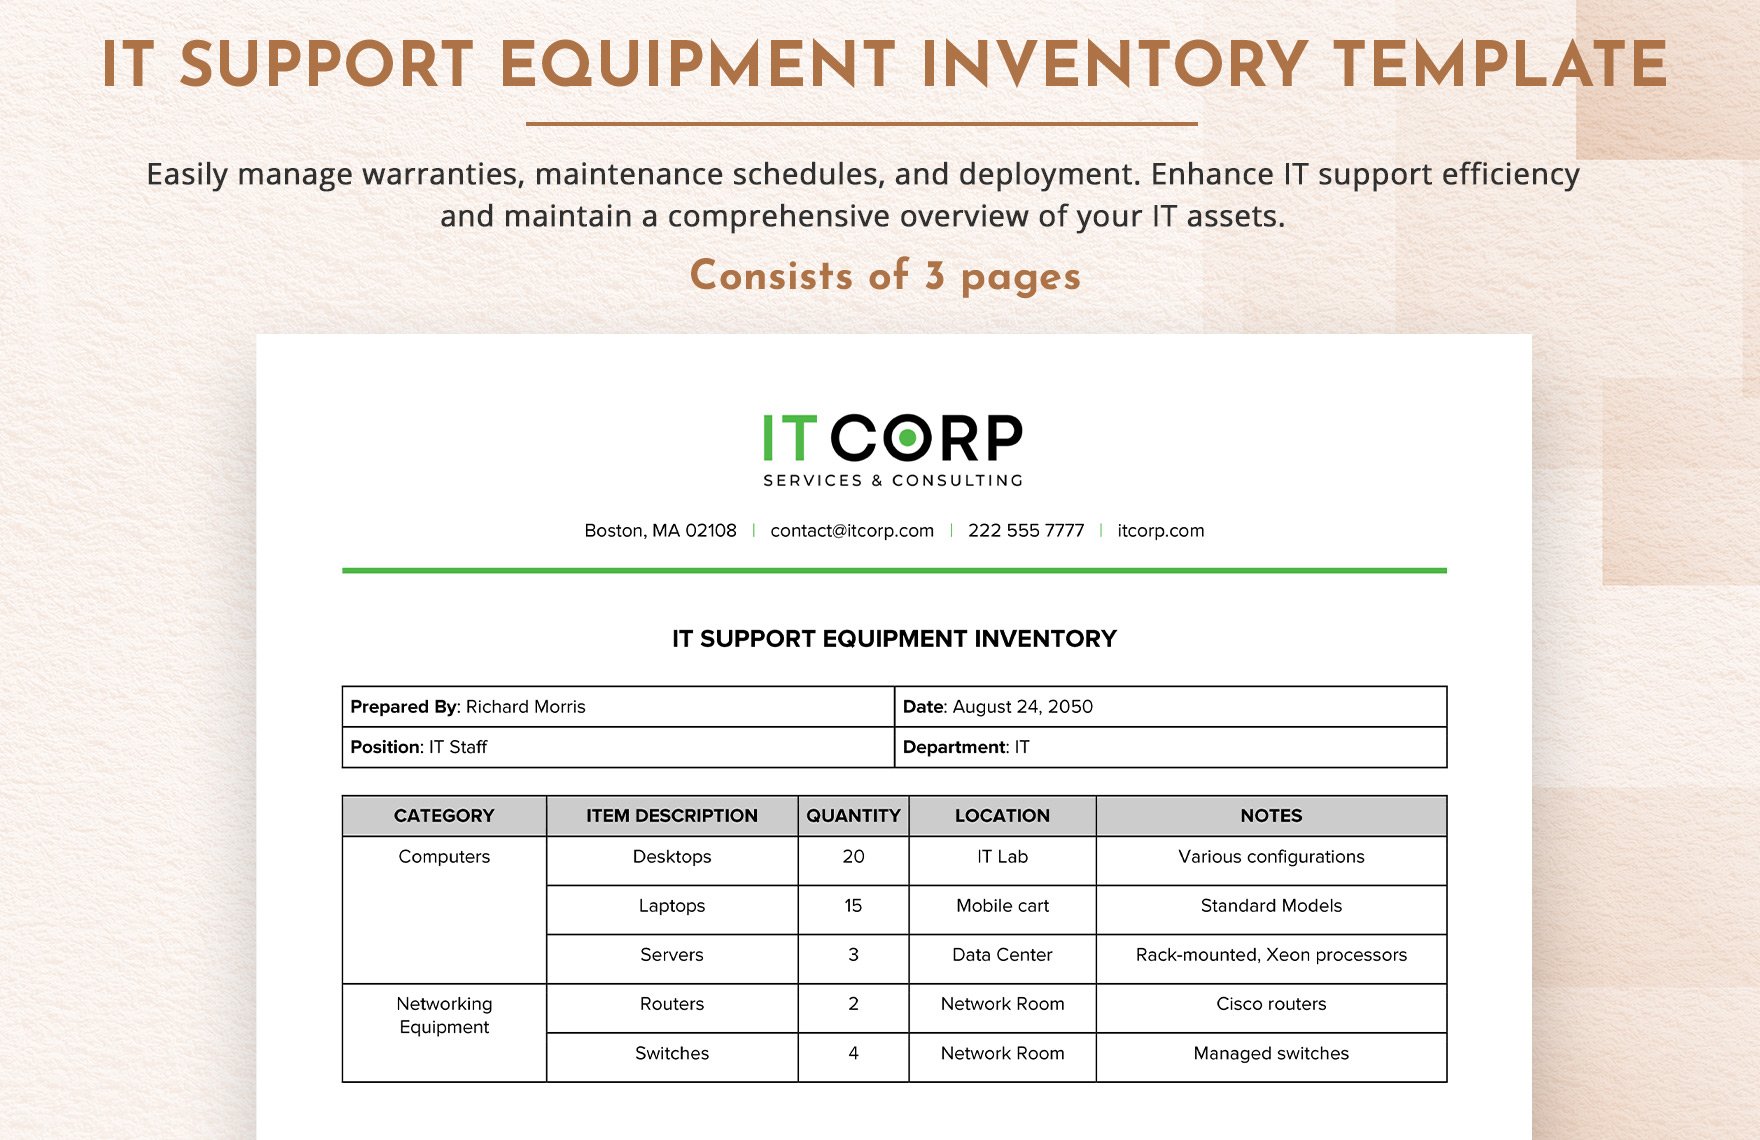 IT Support Equipment Inventory Template